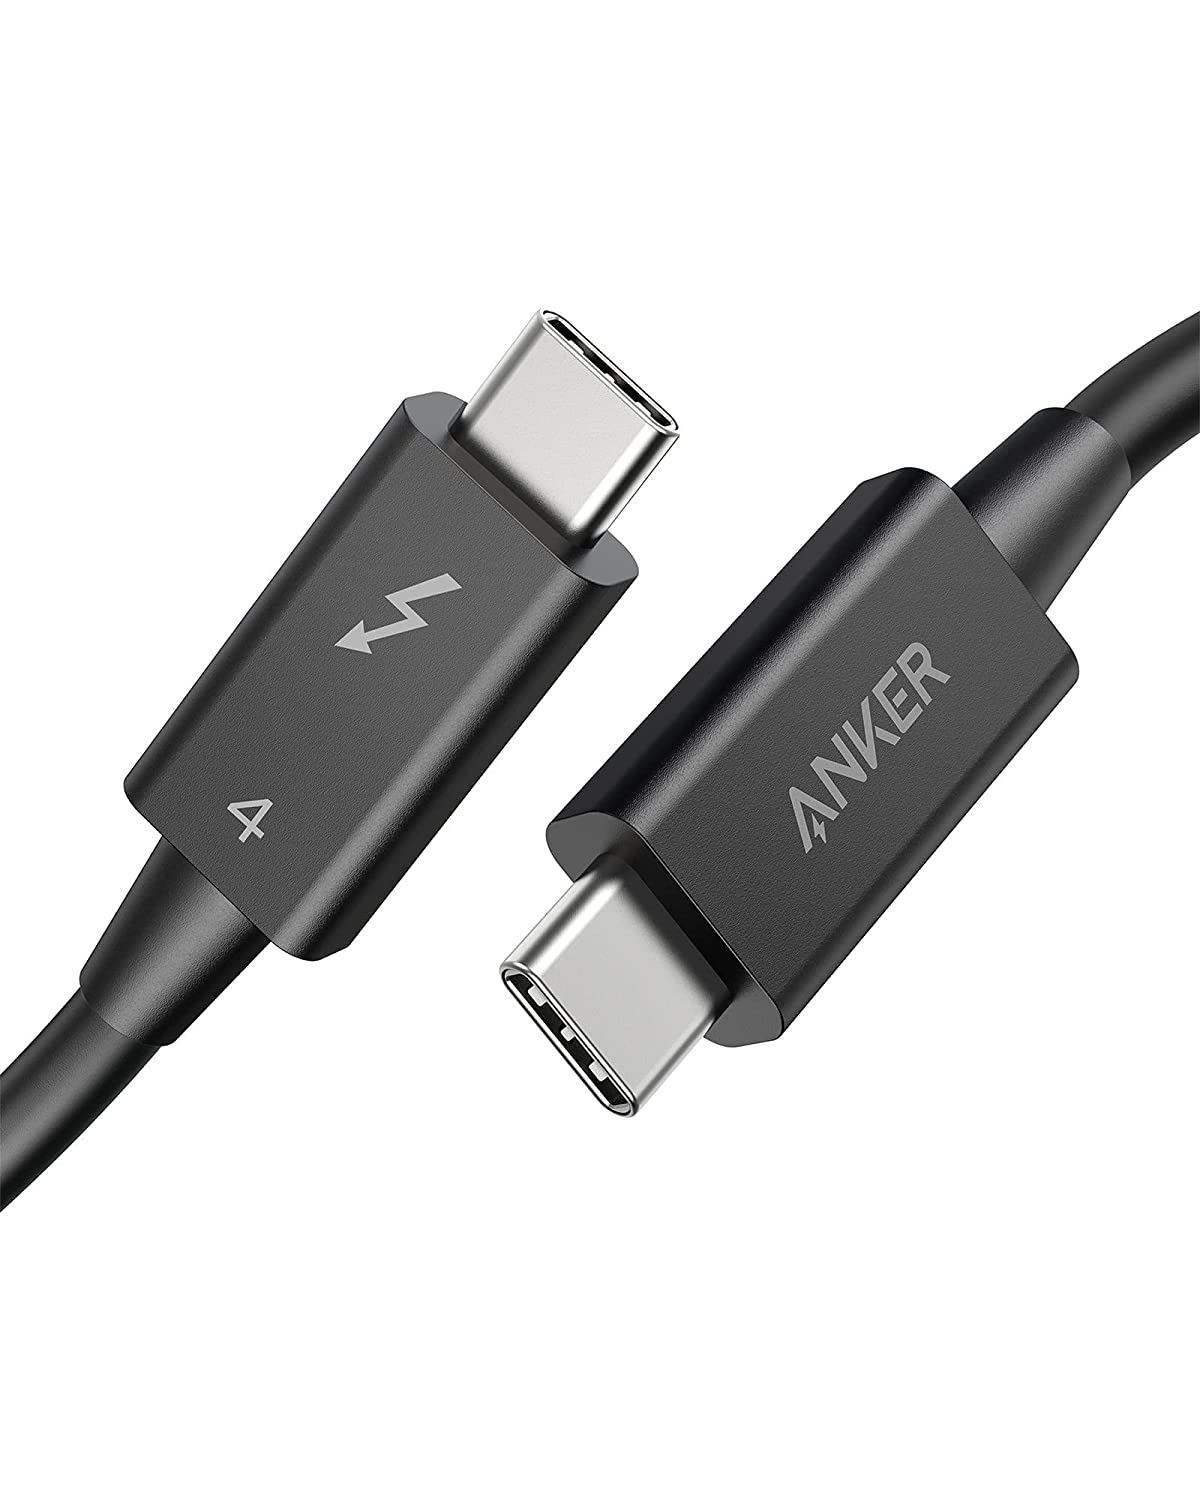 Anker Thunderbolt 4 Cable 2.3 ft, Supports 8K Display [...]